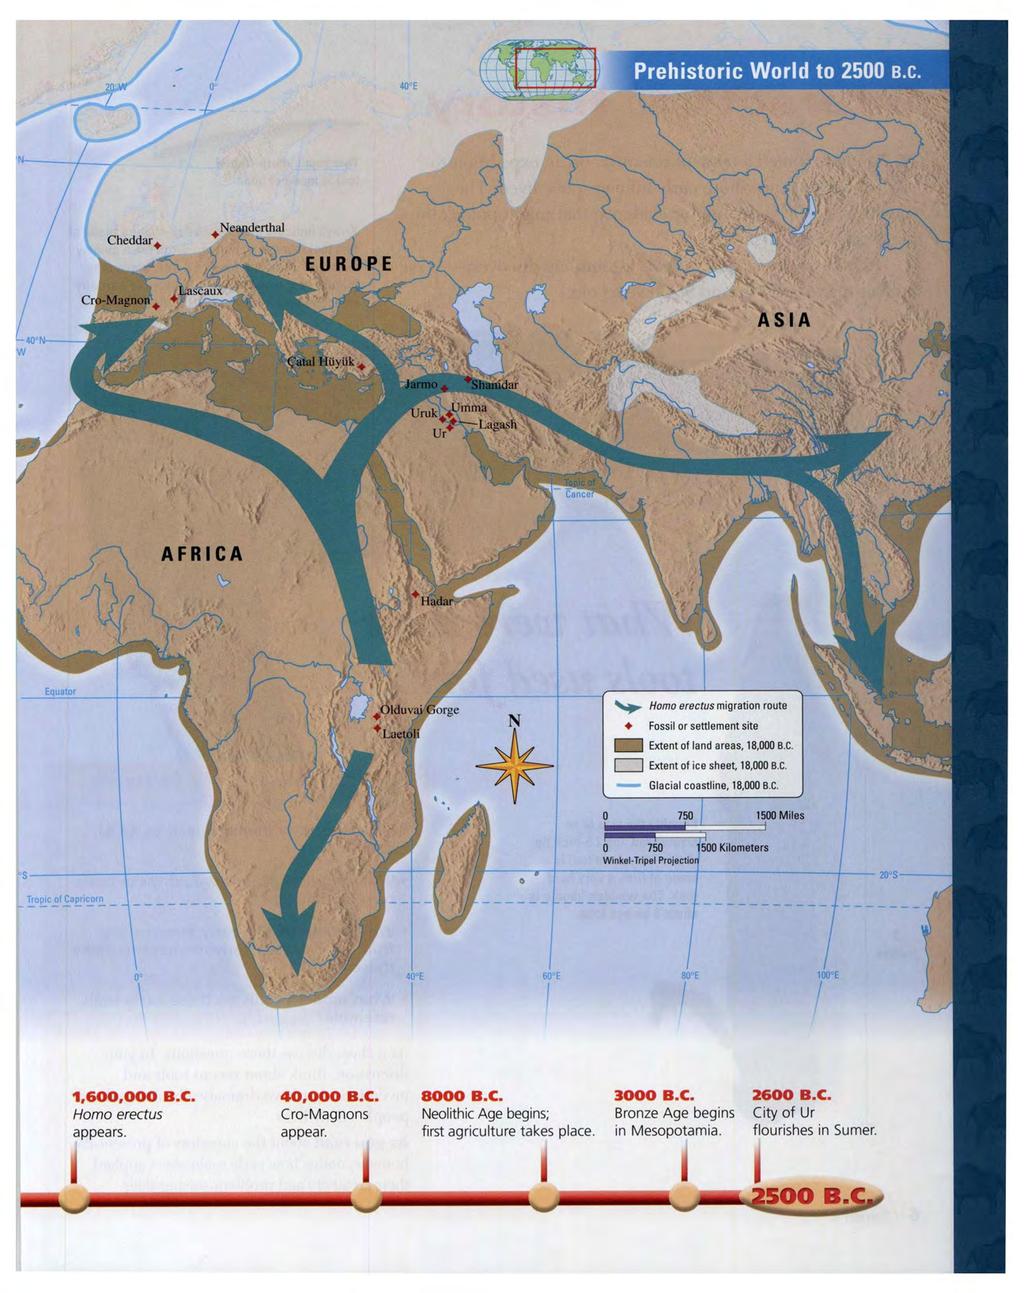 Prehistoric World to 2500 4'atal Hiiyiik + Hadar Equator y Homo erectus migration route Fossil or settlement site Extent of land areas, 18,000 B.C. Extent of ice sheet, 18,000 B.C. Glacial coastline, 18,000 B.